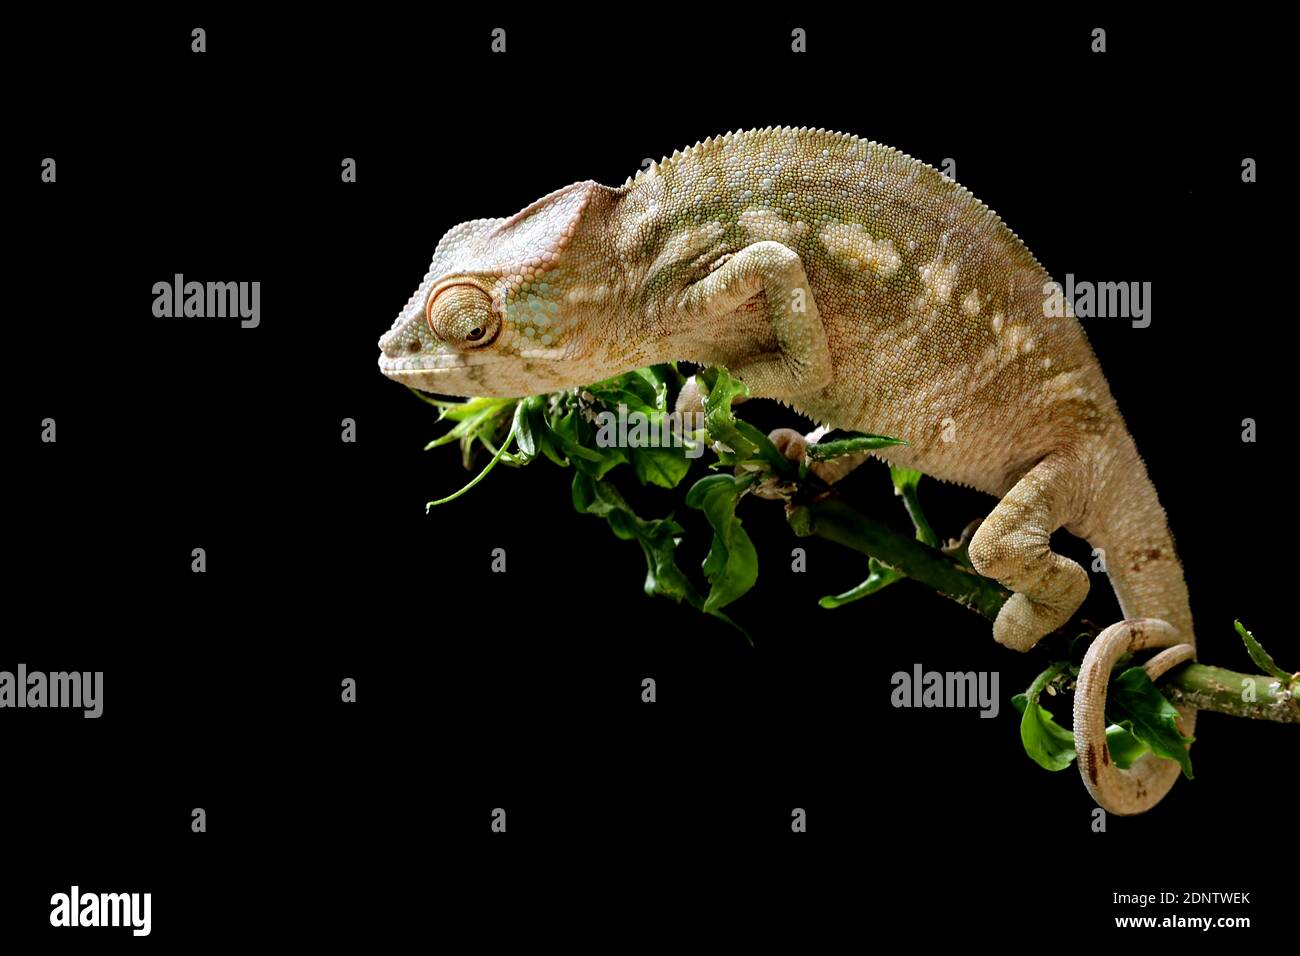 Baby panther chameleon on a branch, Indonesia Stock Photo